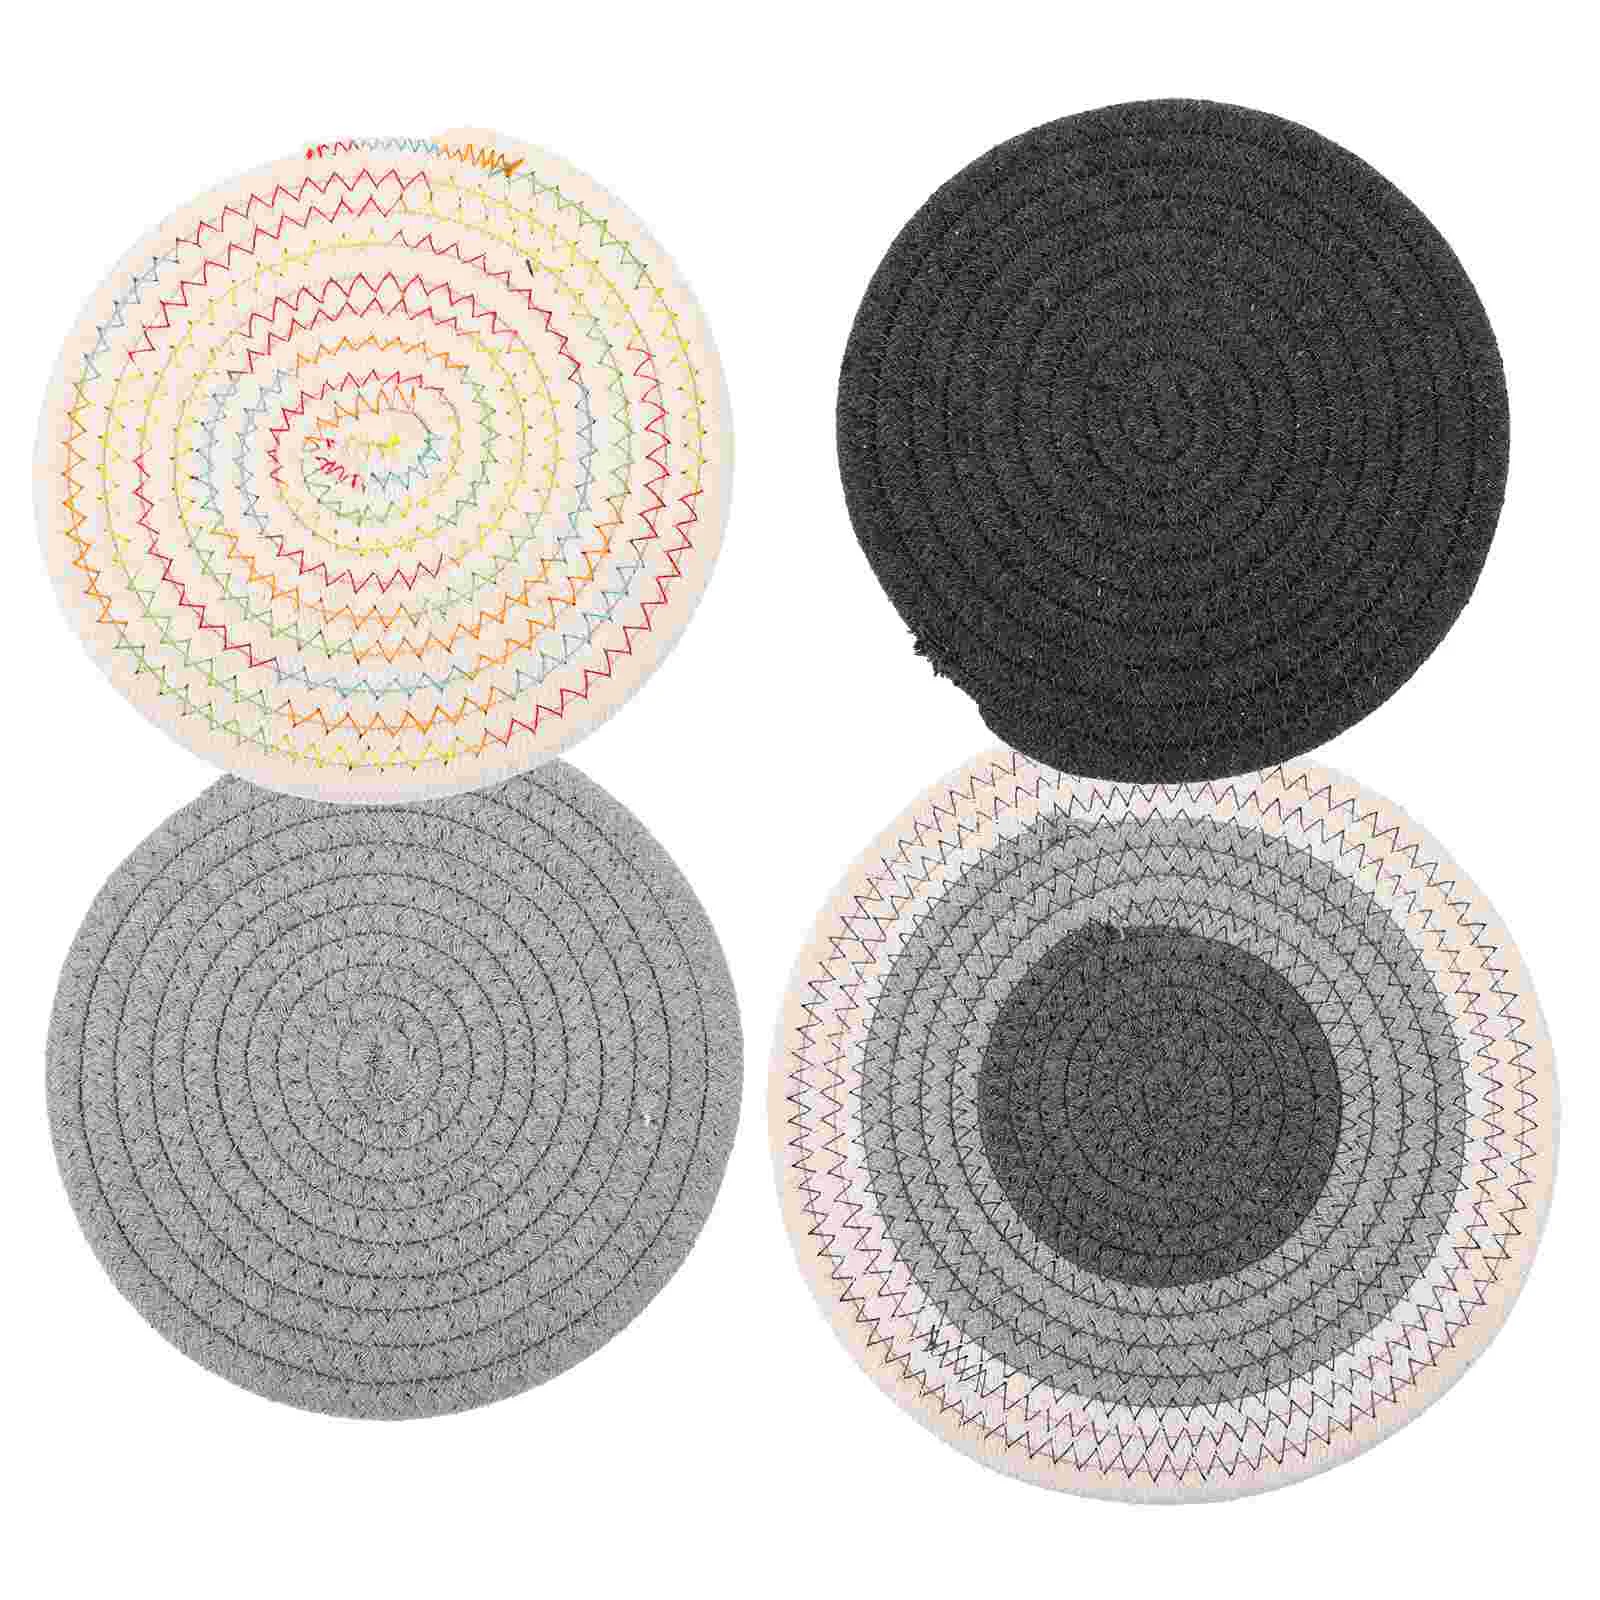 

4 Pcs Coasters Farmhouse Kitchen Hot Pads Weave Drinks Trivets Countertops Cotton Rope Tabletop Protection Absorbent